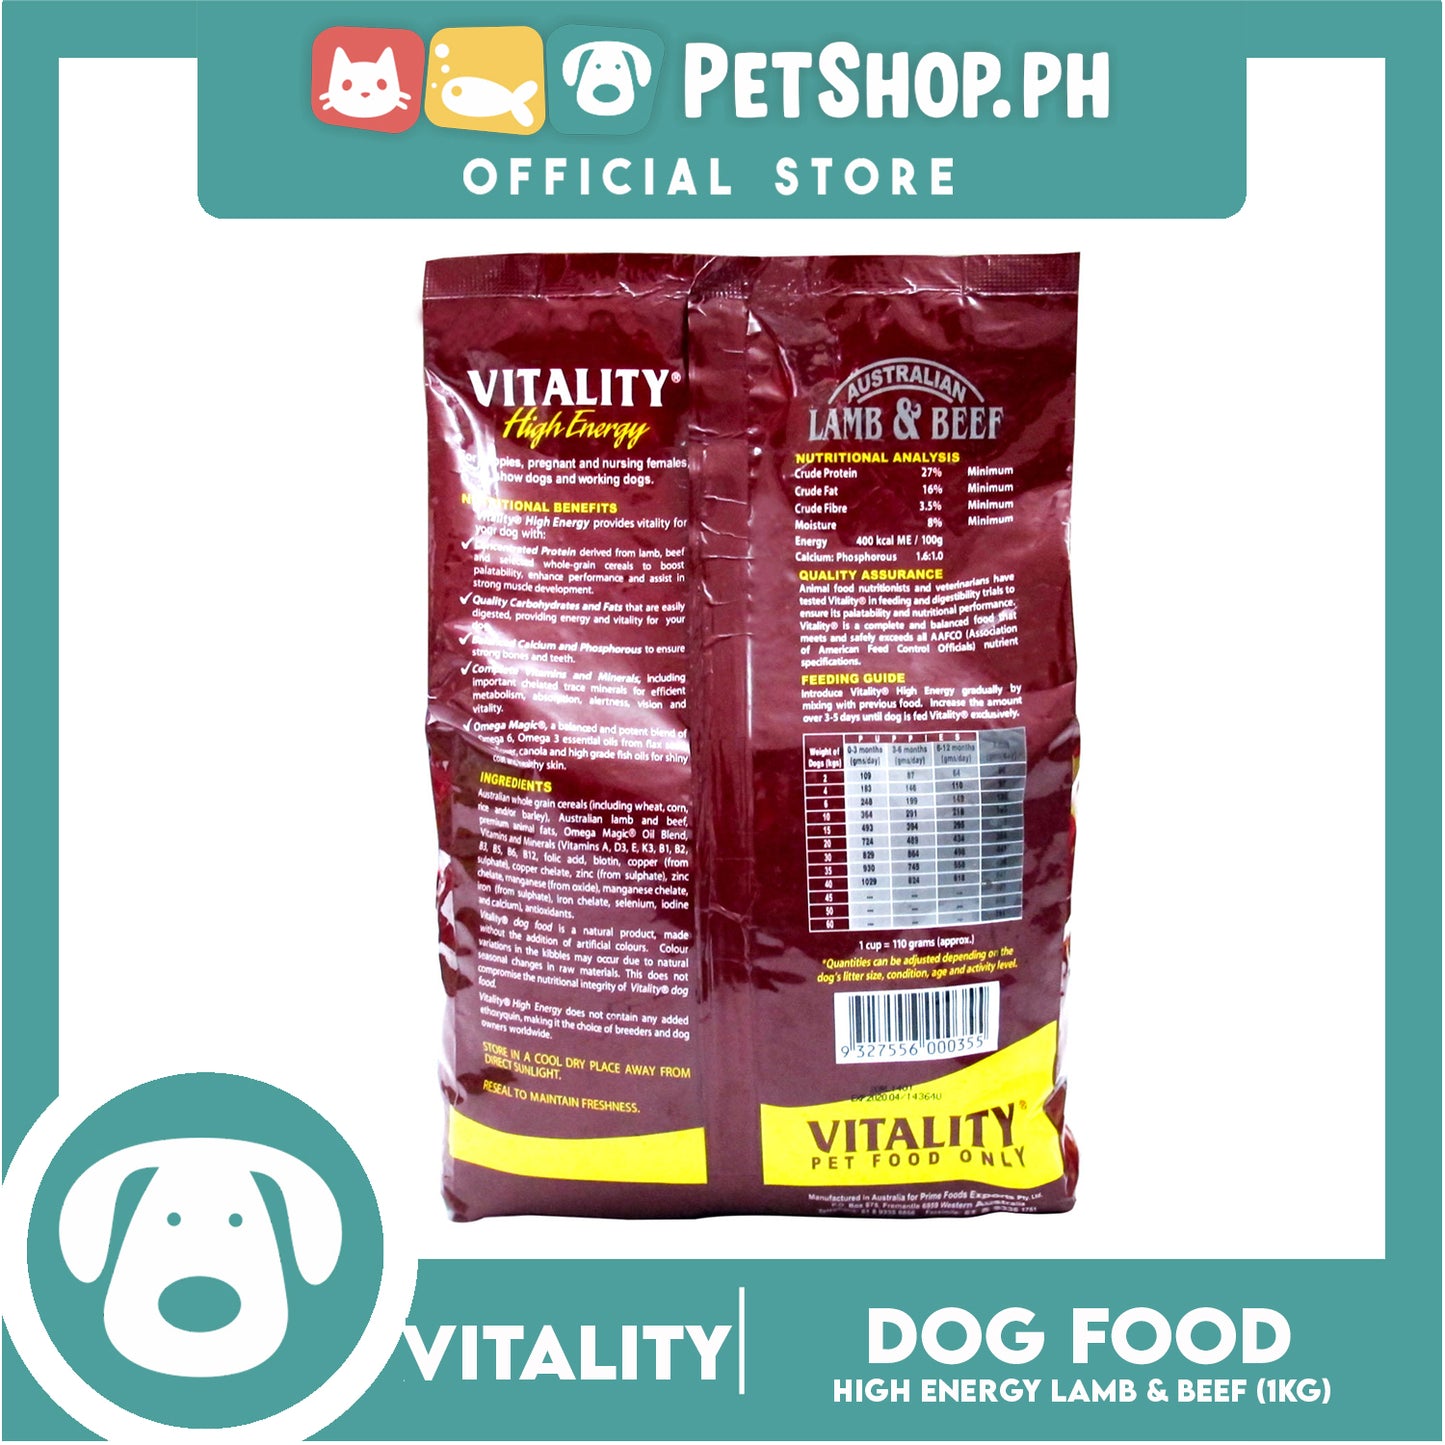 Vitality High Energy Lamb And Beef Dry Dog Food 1kg Promotes Shiny Coat And Healthy Skin Dog Food, Dry Dog Food